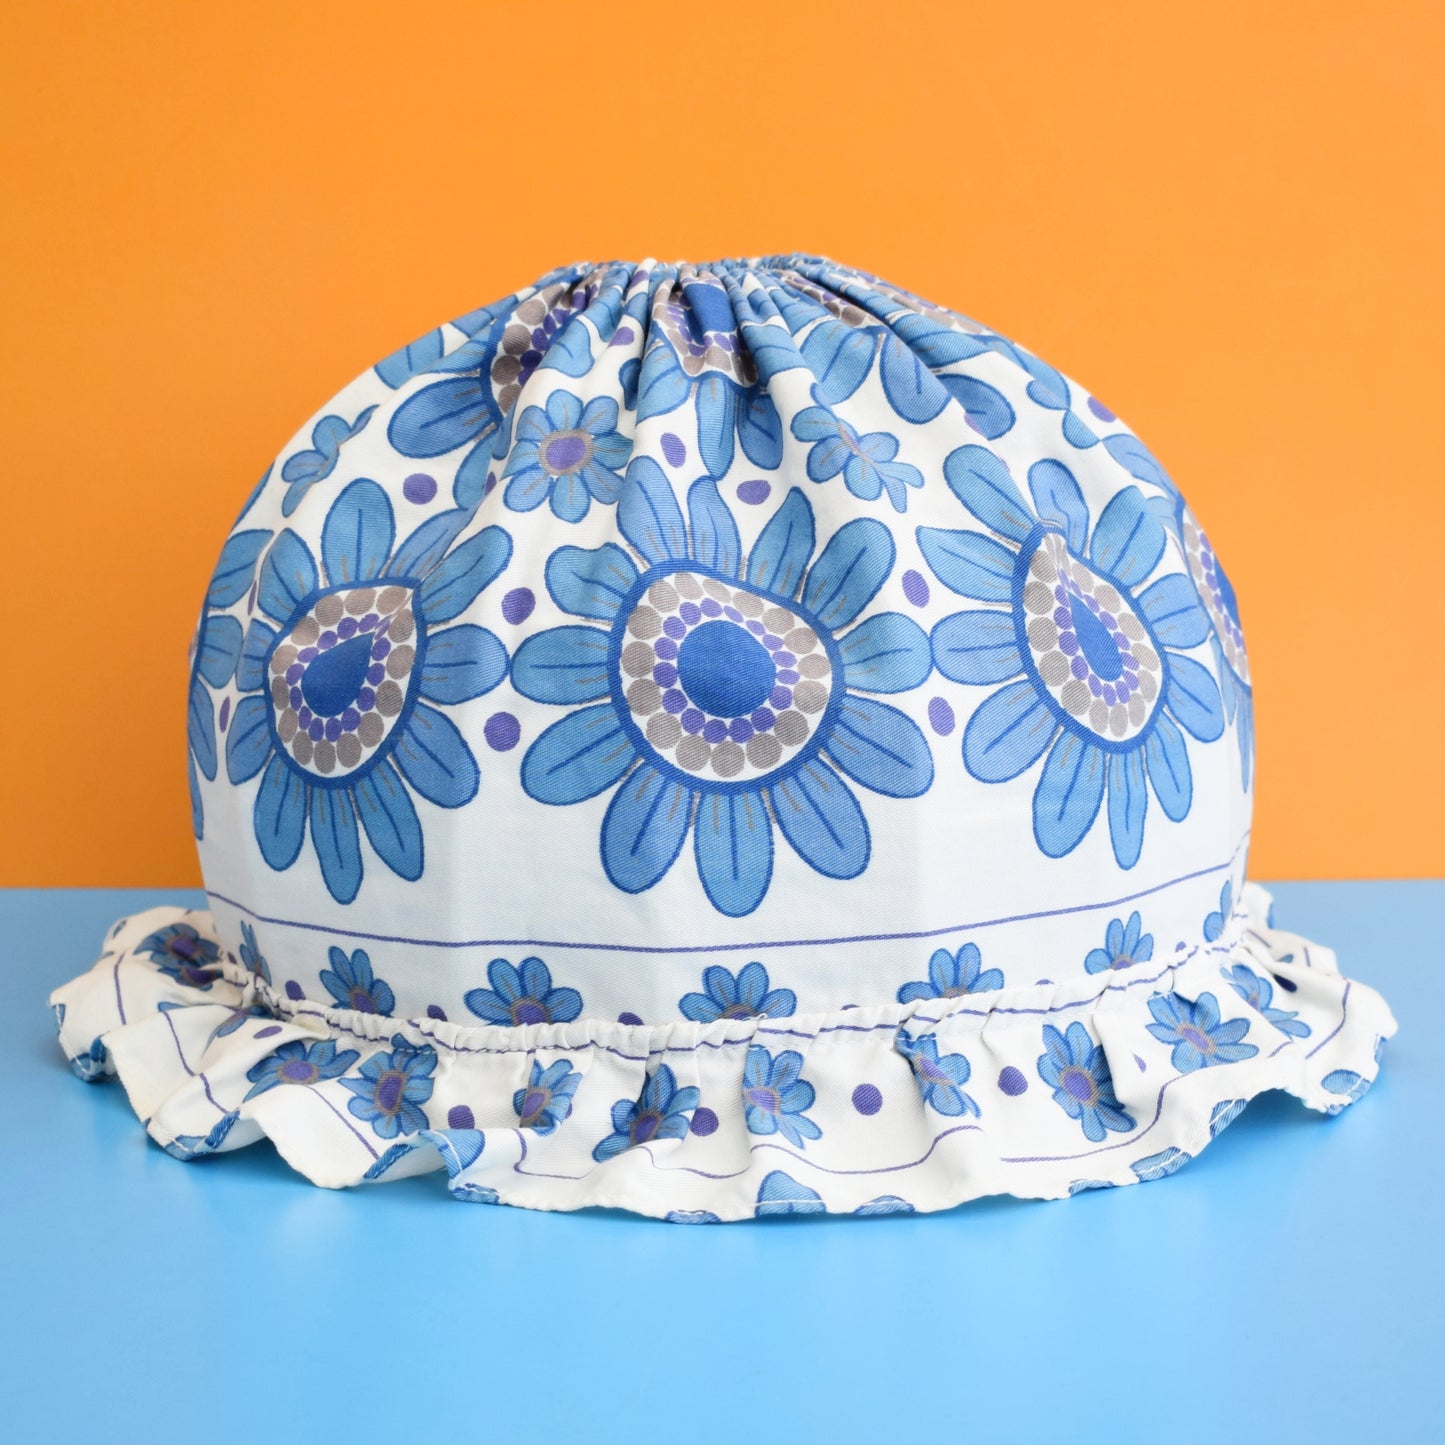 Vintage 1970s Fabric Lampshade - Flower Power - Blue